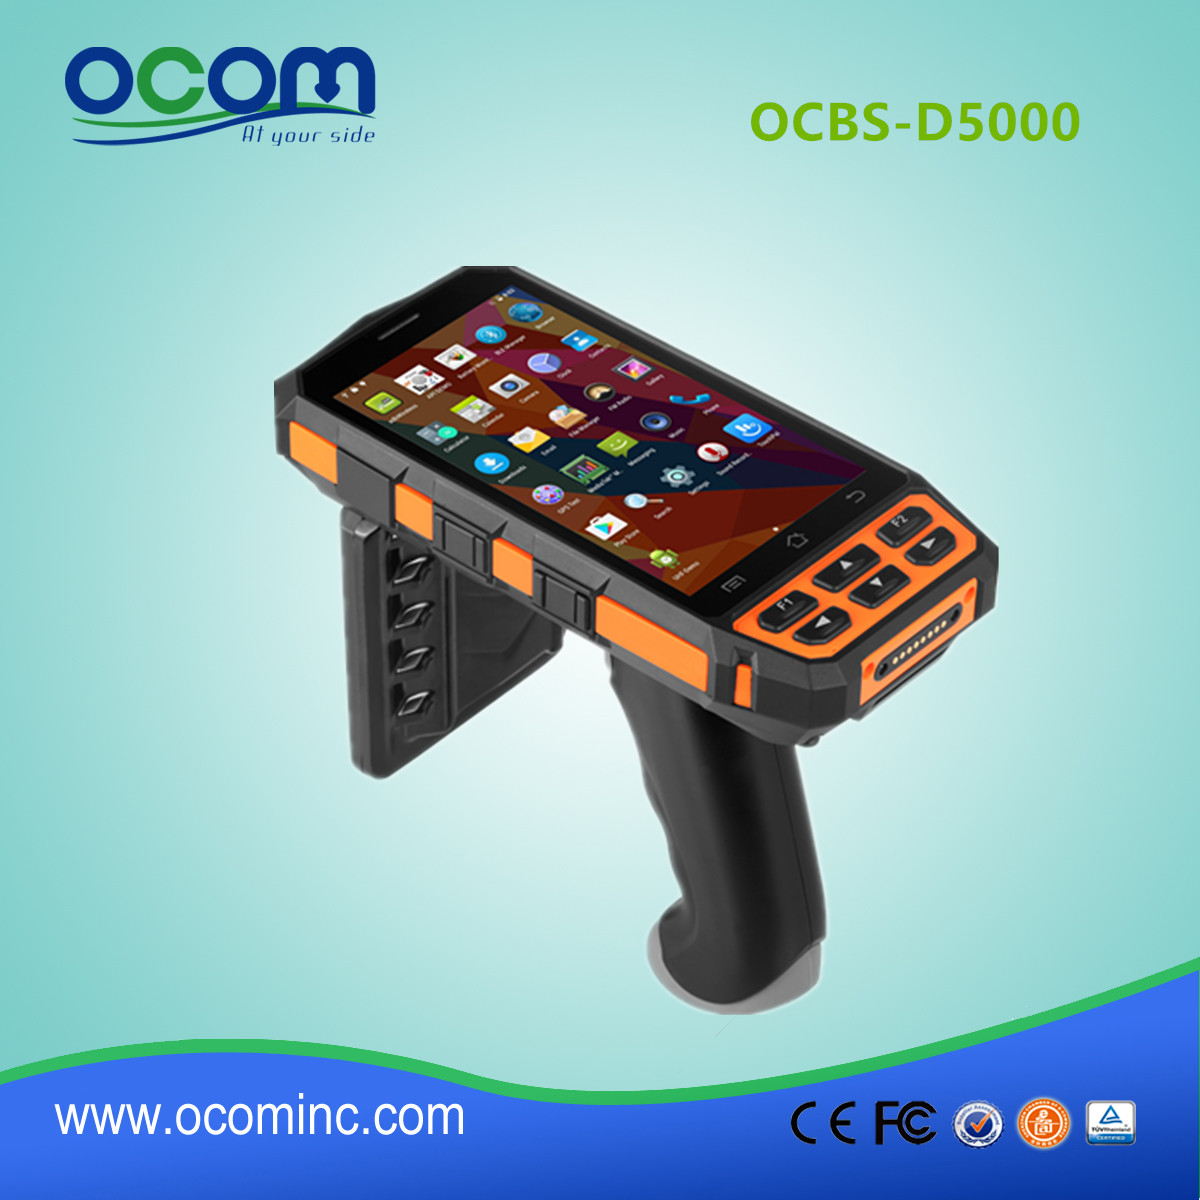 OCBS-D5000 Restaurant Handheld robuste Android OS industrielle PDA RFID-Leser